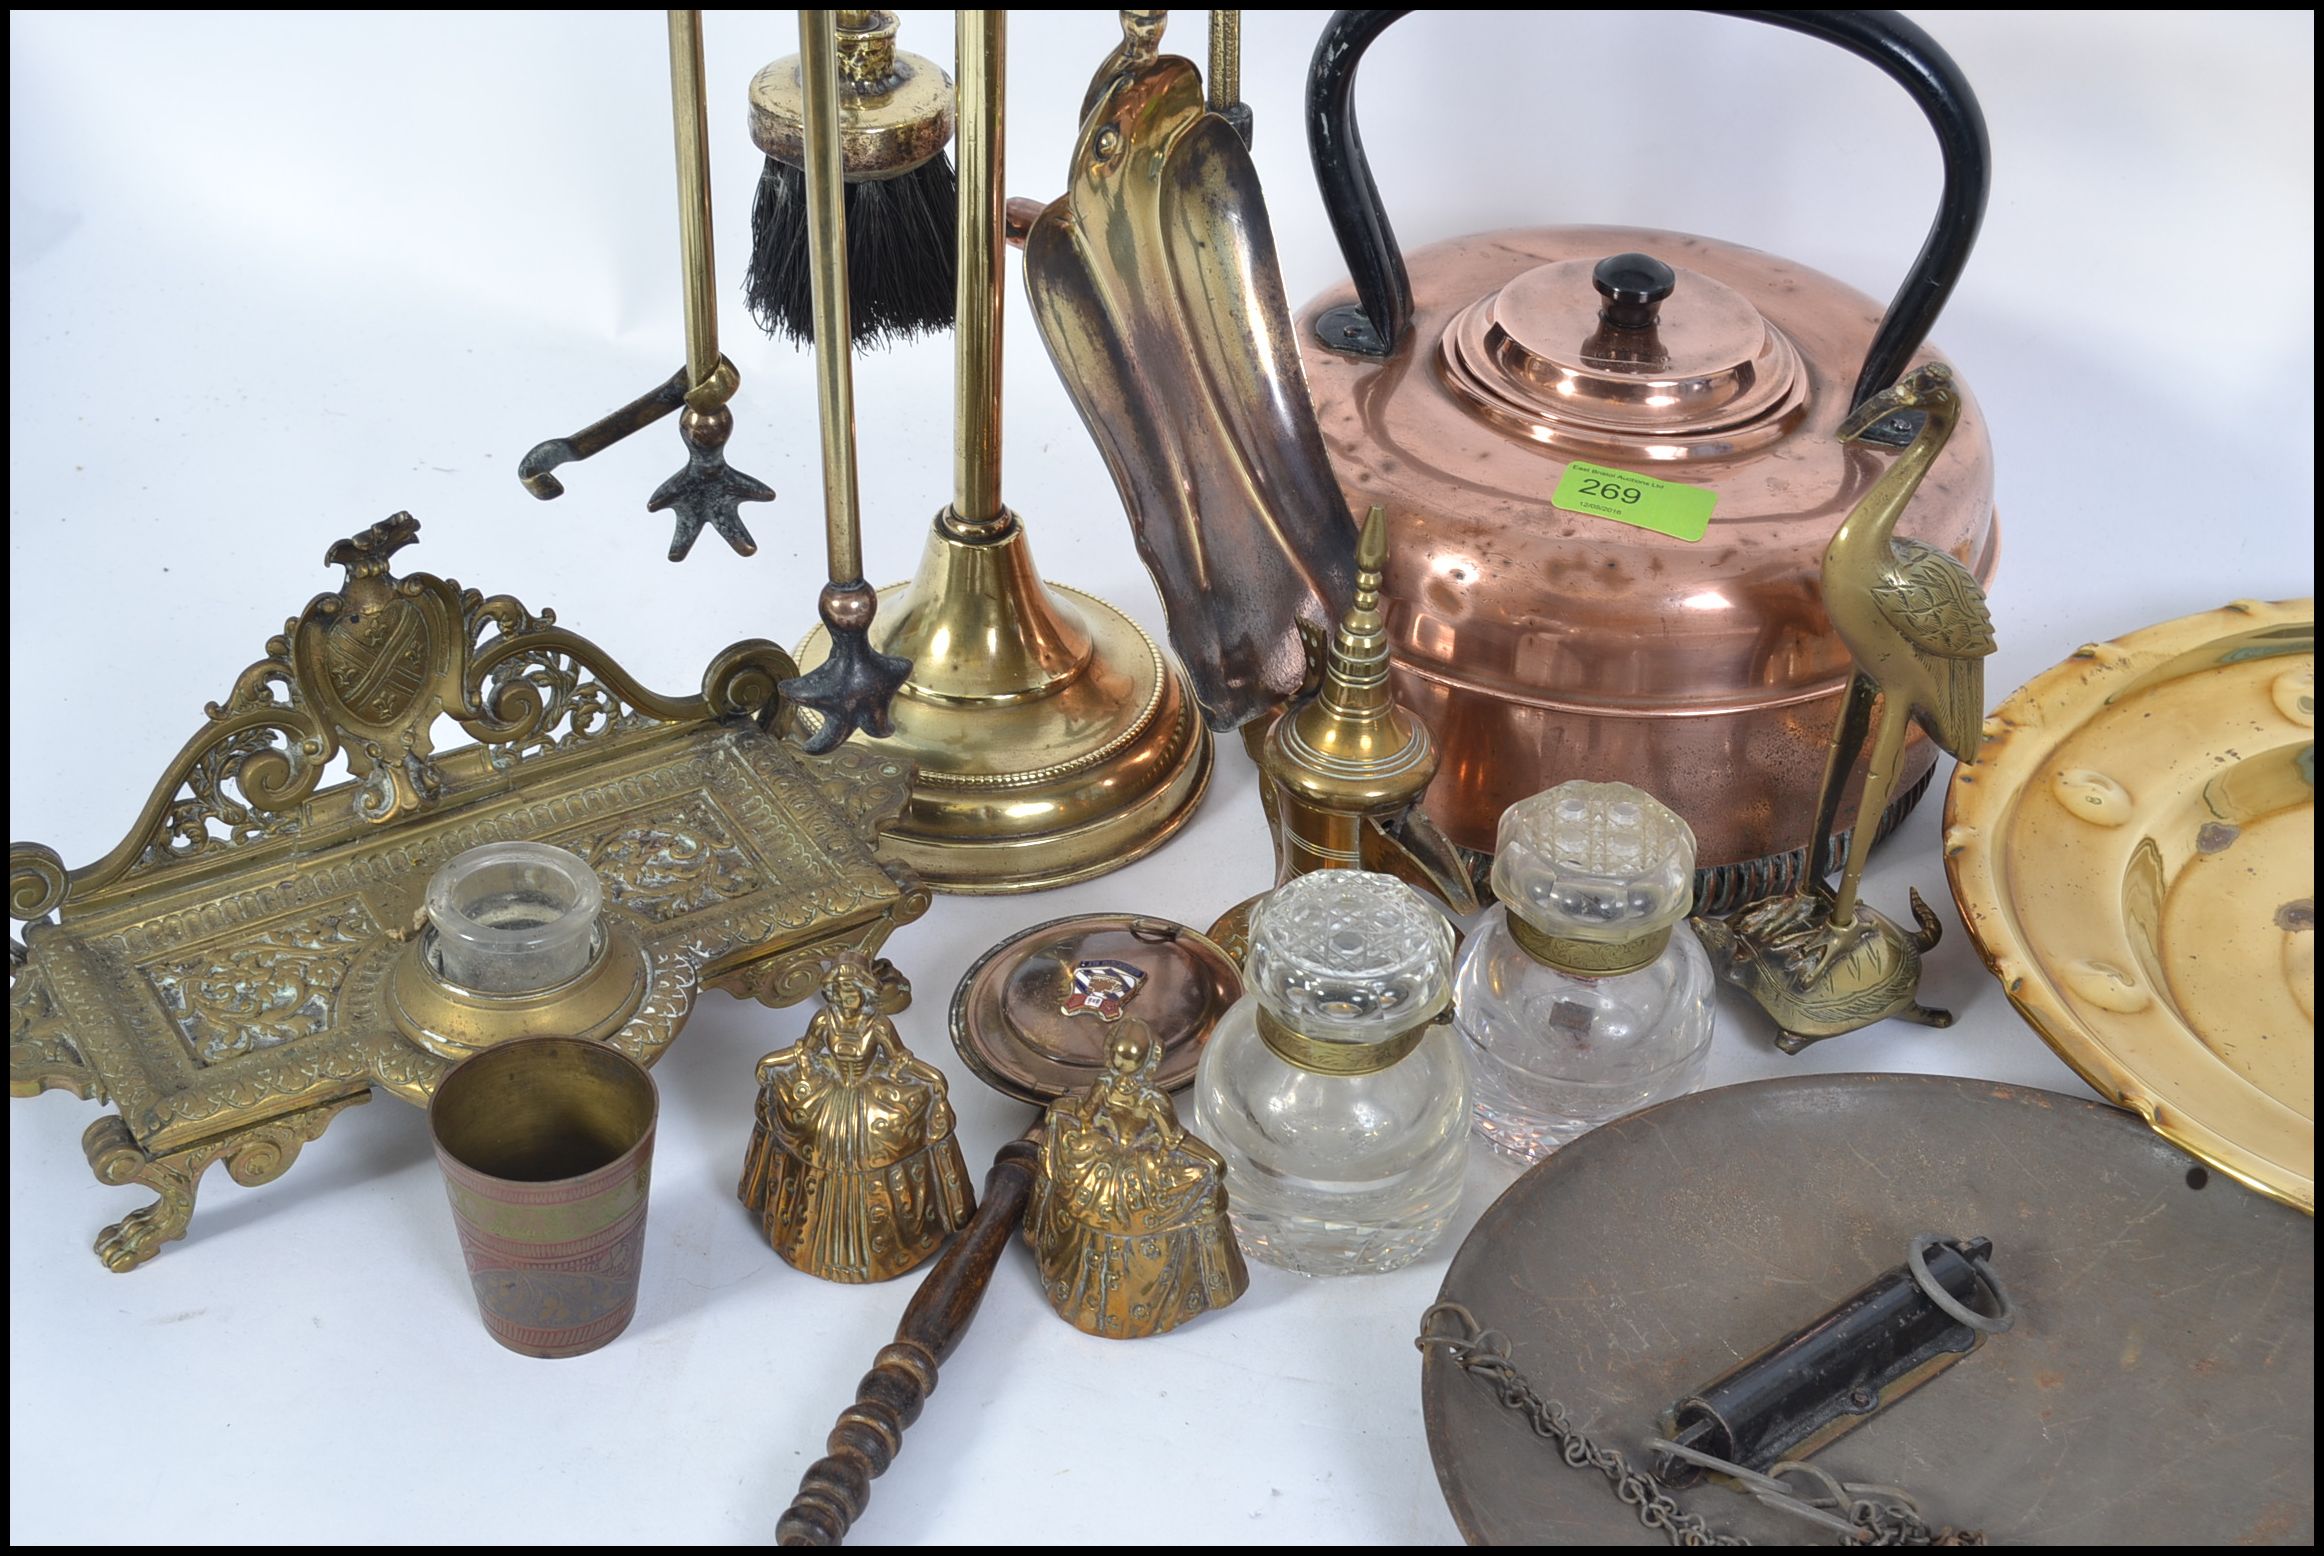 A good quality brass fireside compendium set, brass kettle, scales, - Image 2 of 2